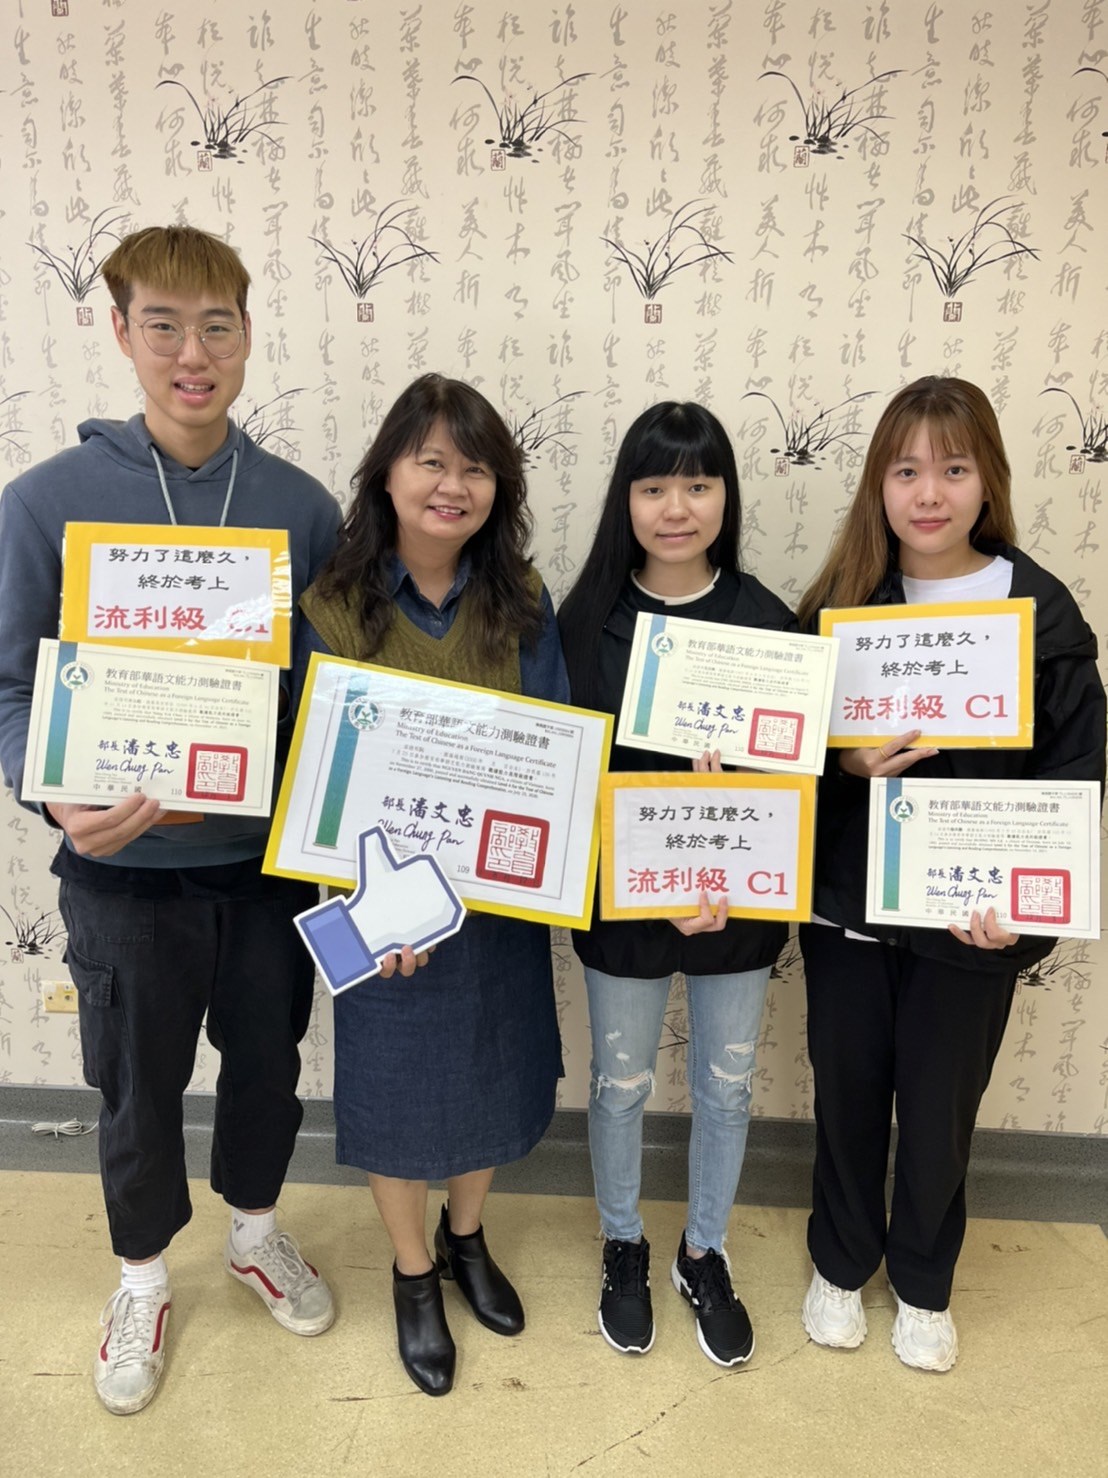 02.KSU Regular Chinese Classes Promote Certificate Counseling with Outstanding Results of 80% Pass Rate